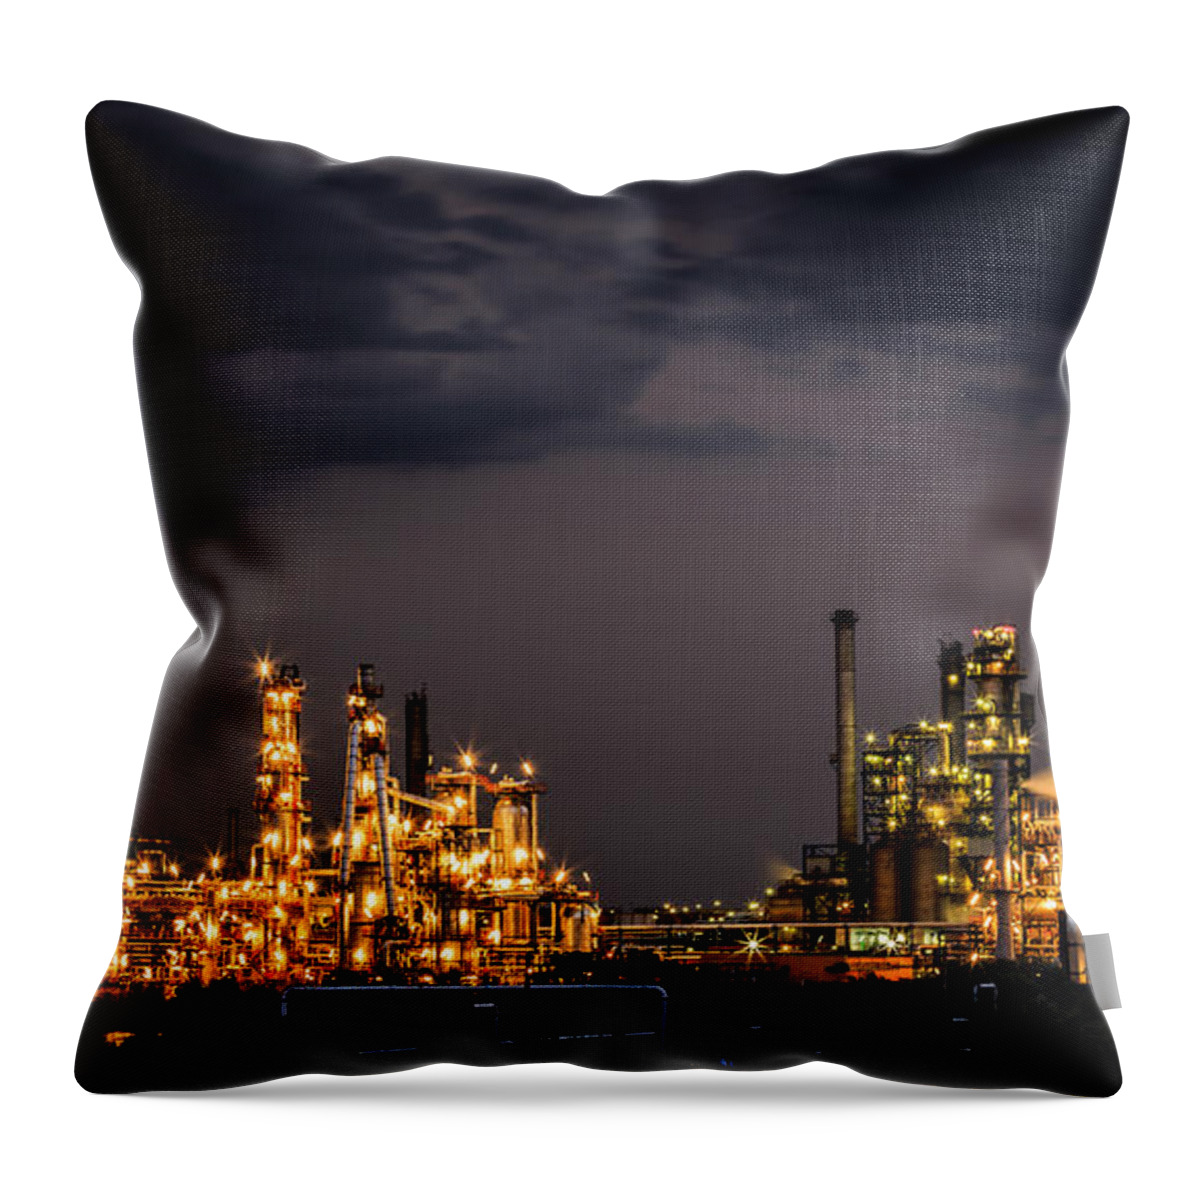 Gas Throw Pillow featuring the photograph The Refinery by Mihai Andritoiu